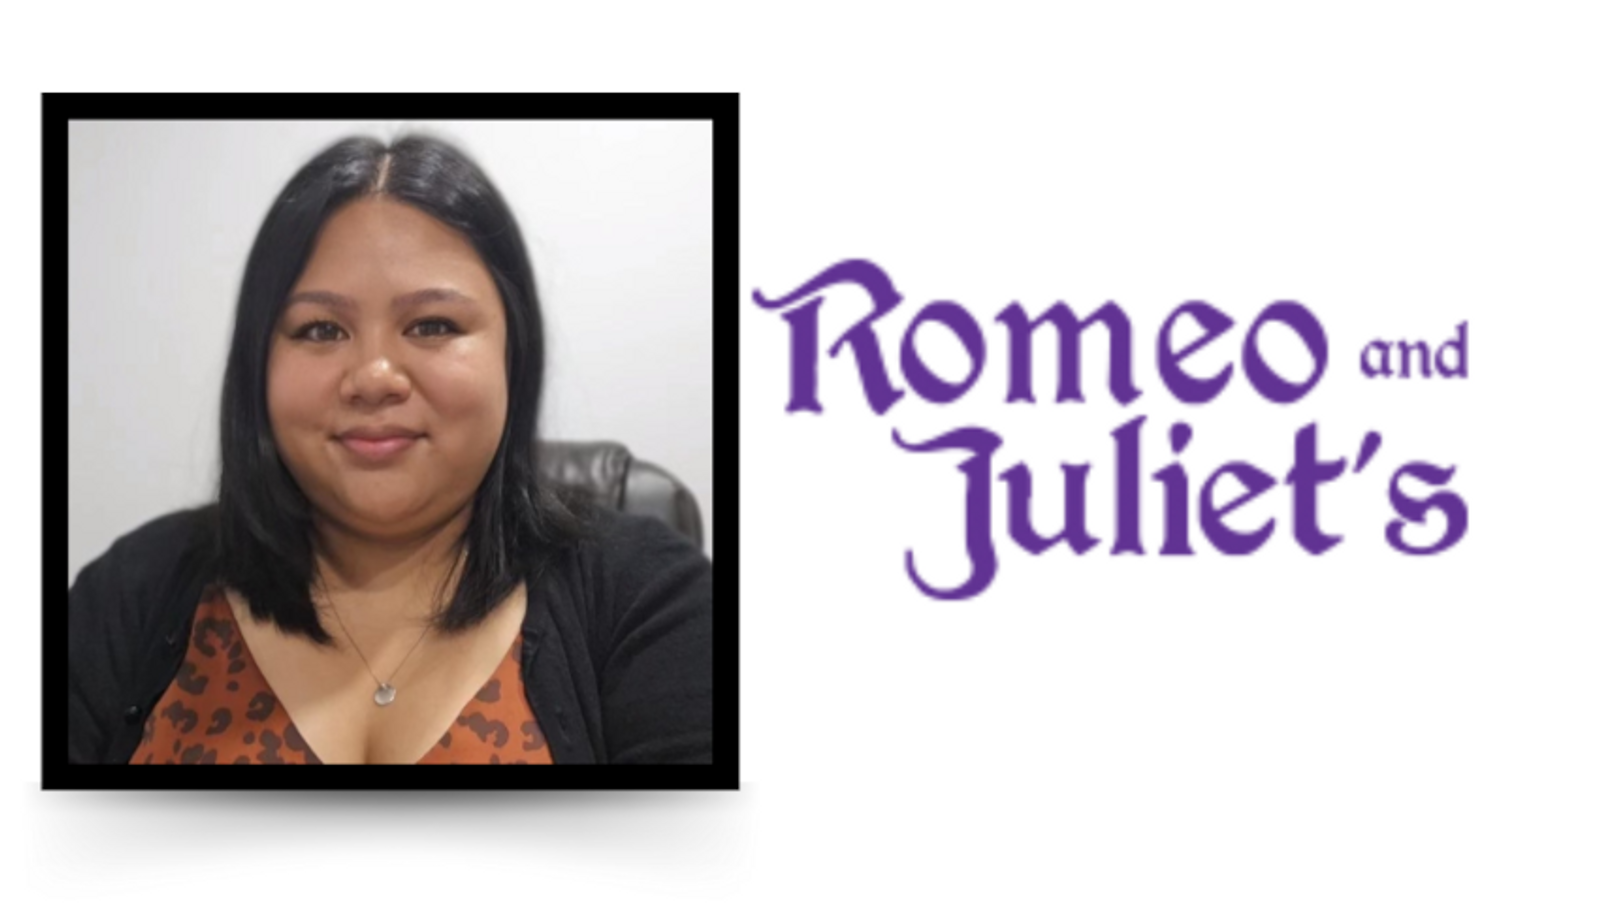 Jordan Cordoba Appointed Lead Buyer for Romeo and Juliet’s Stores